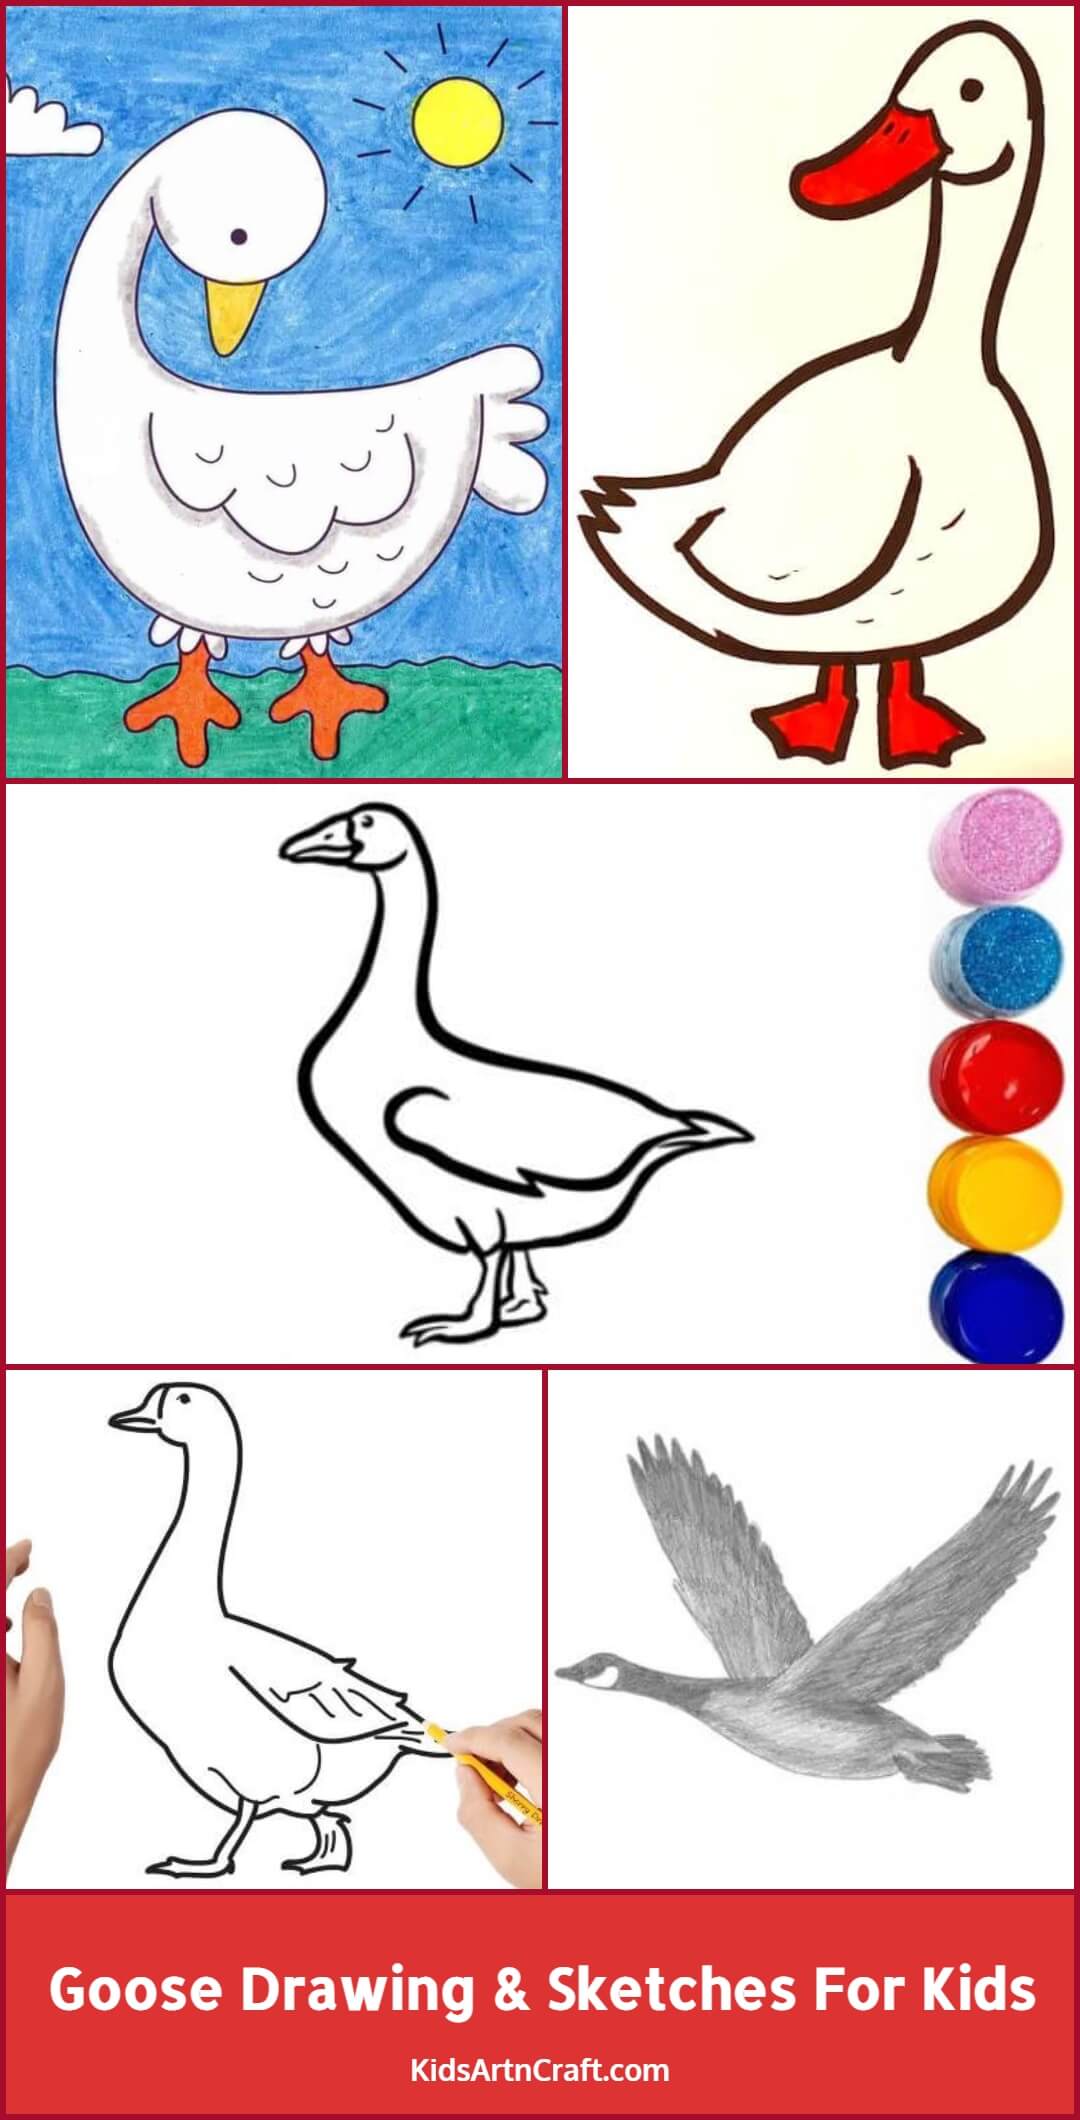 Goose Drawing & Sketches For Kids